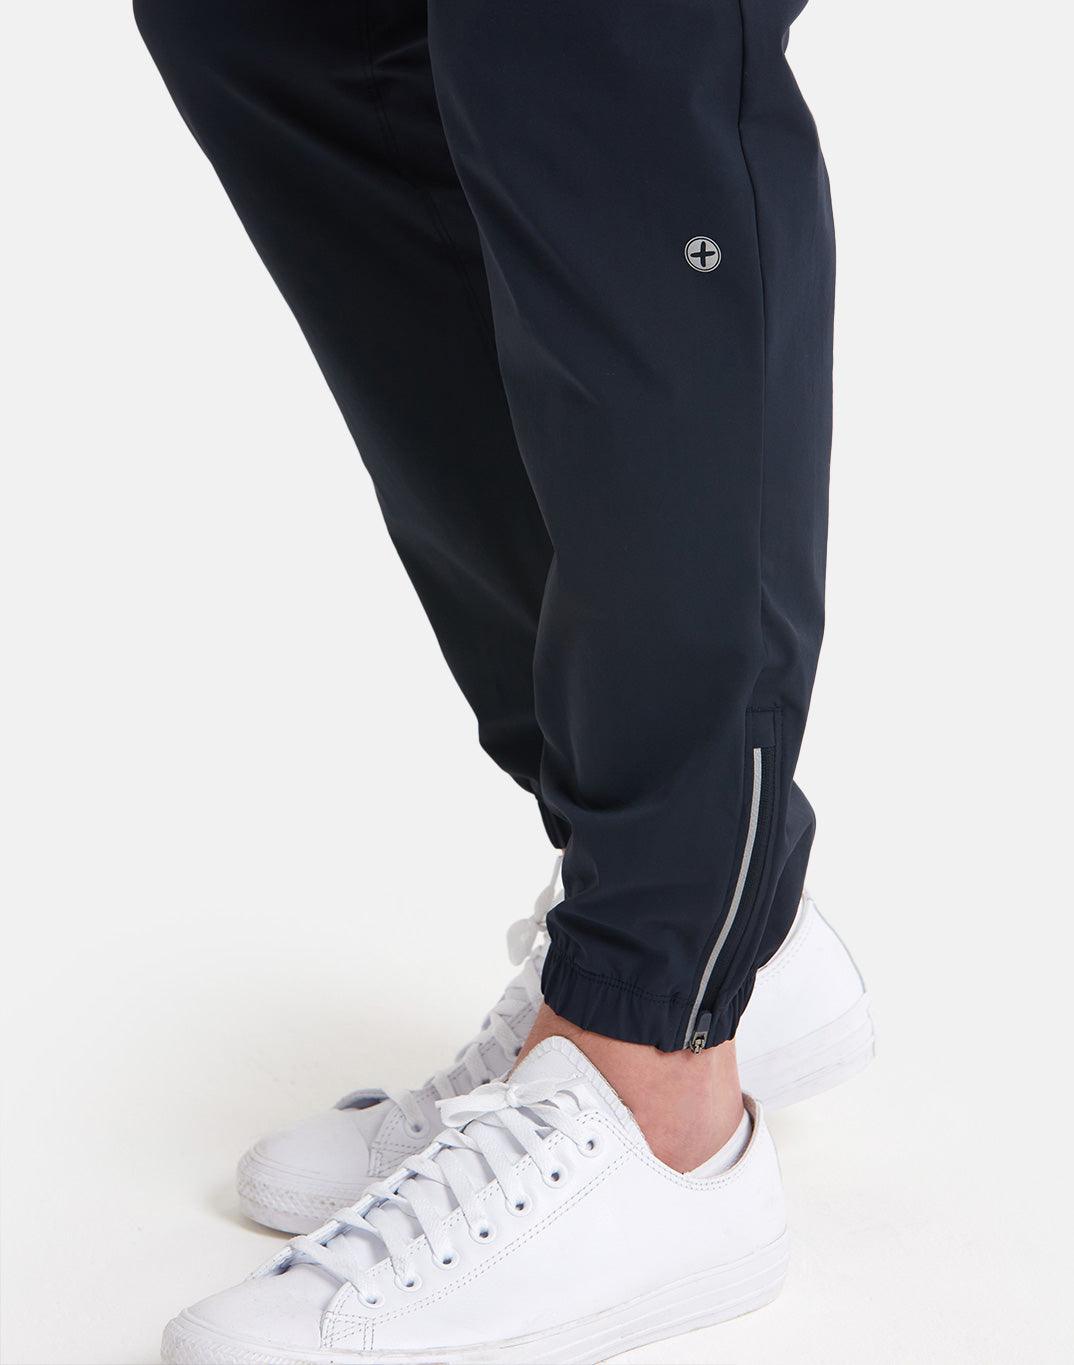 In Motion Jogger in Obsidian - Joggers - Gym+Coffee